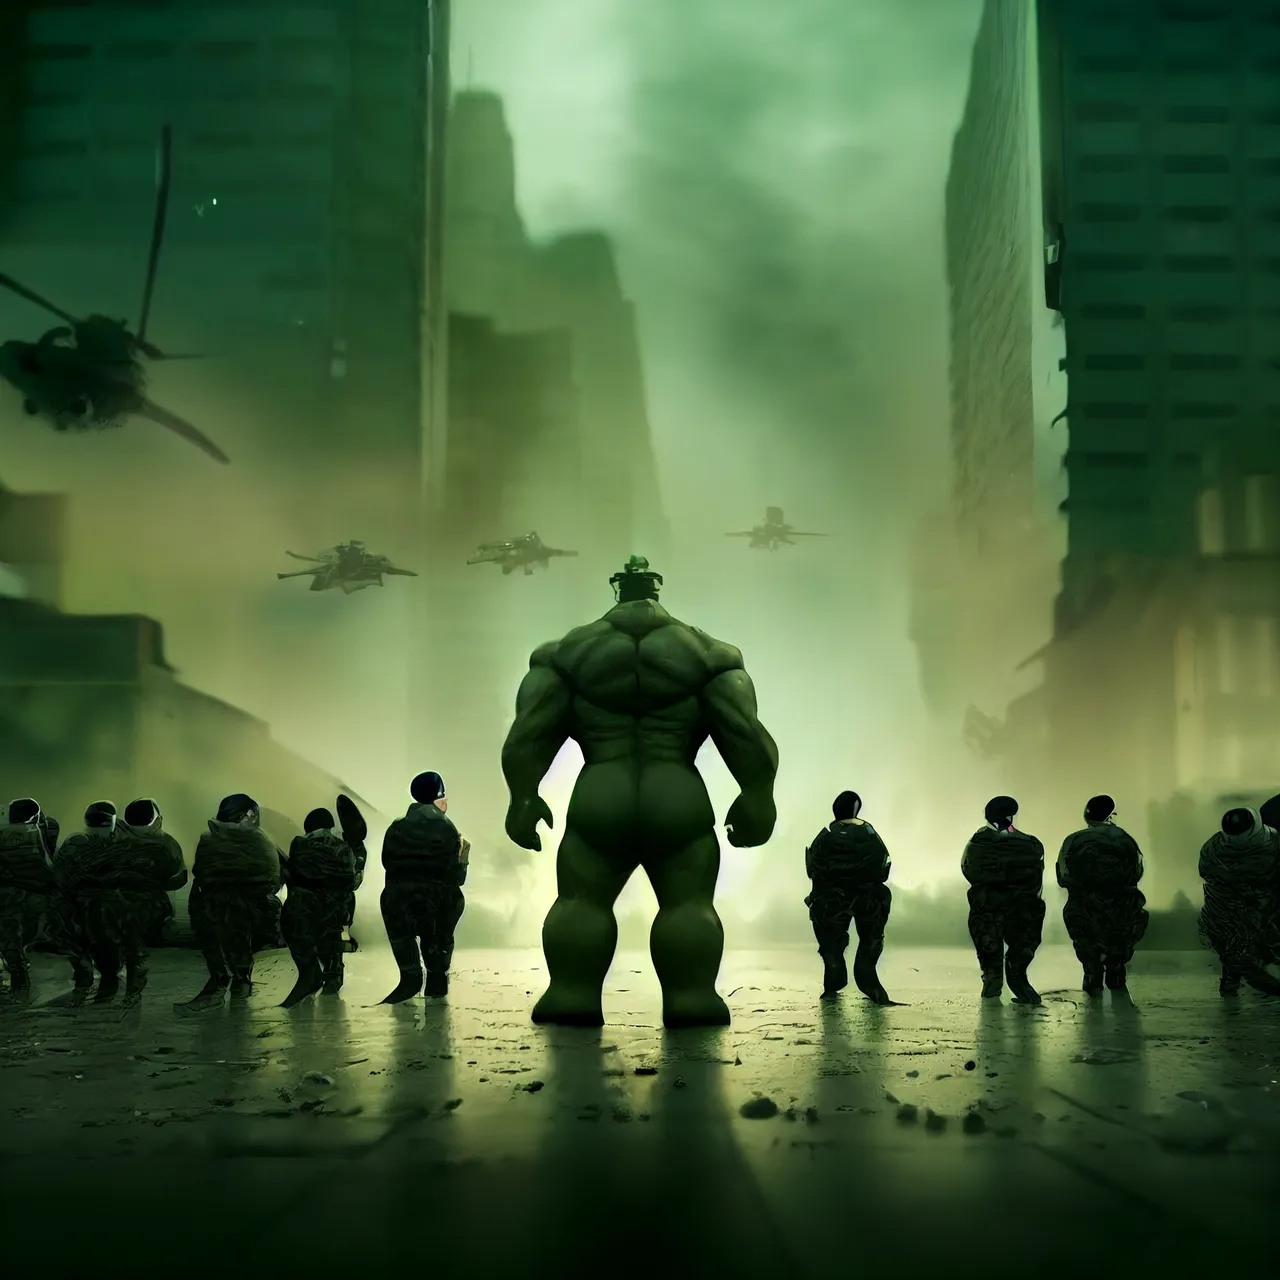 Ed_Privat_Baby_Hulk_standing_in_front_of_an_army_of_soldiers_wi_3e921360-f1d6-499e-9520-9fd583ad1fbc.png